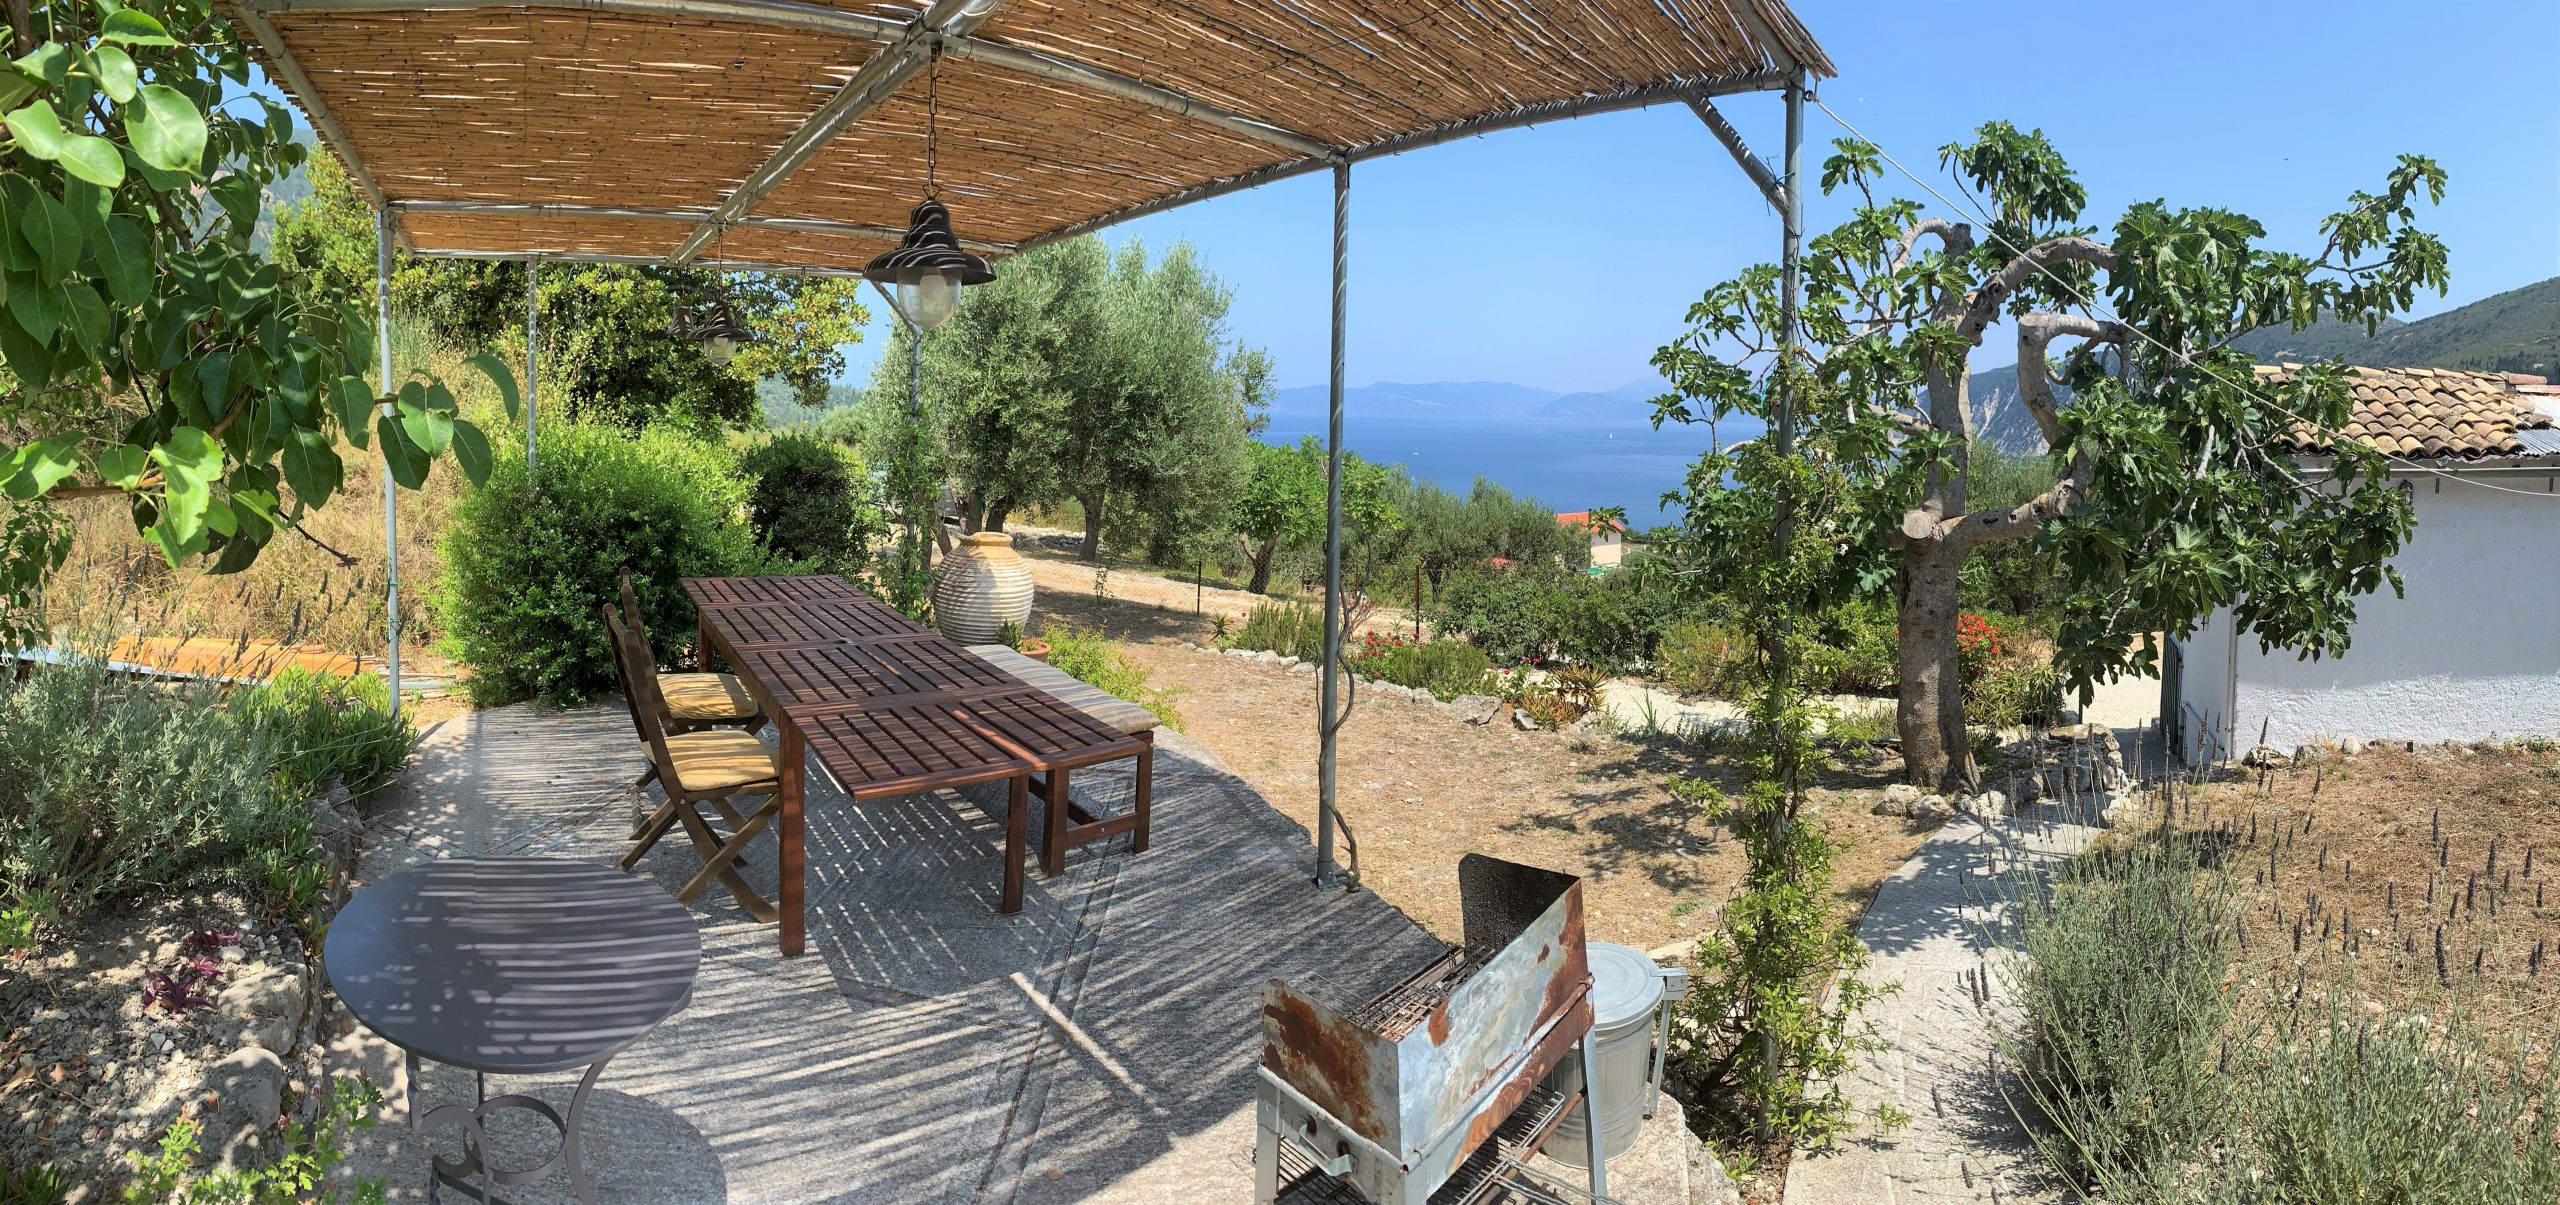 Outdoor spaces and views from house for sale Ithaca Greece, Ag. Saranta